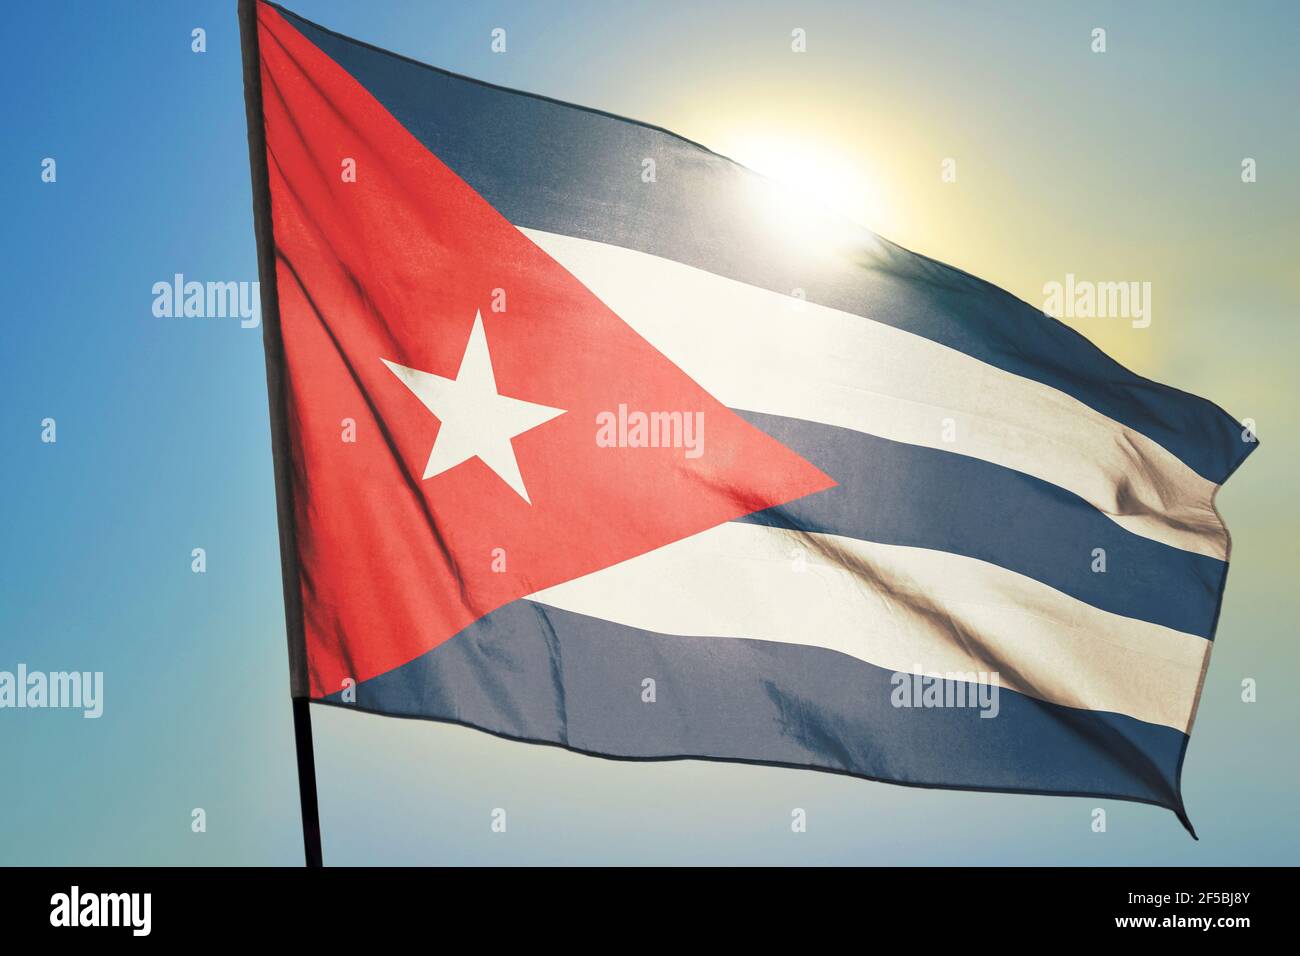 Cuba flag waving on the wind in front of sun Stock Photo